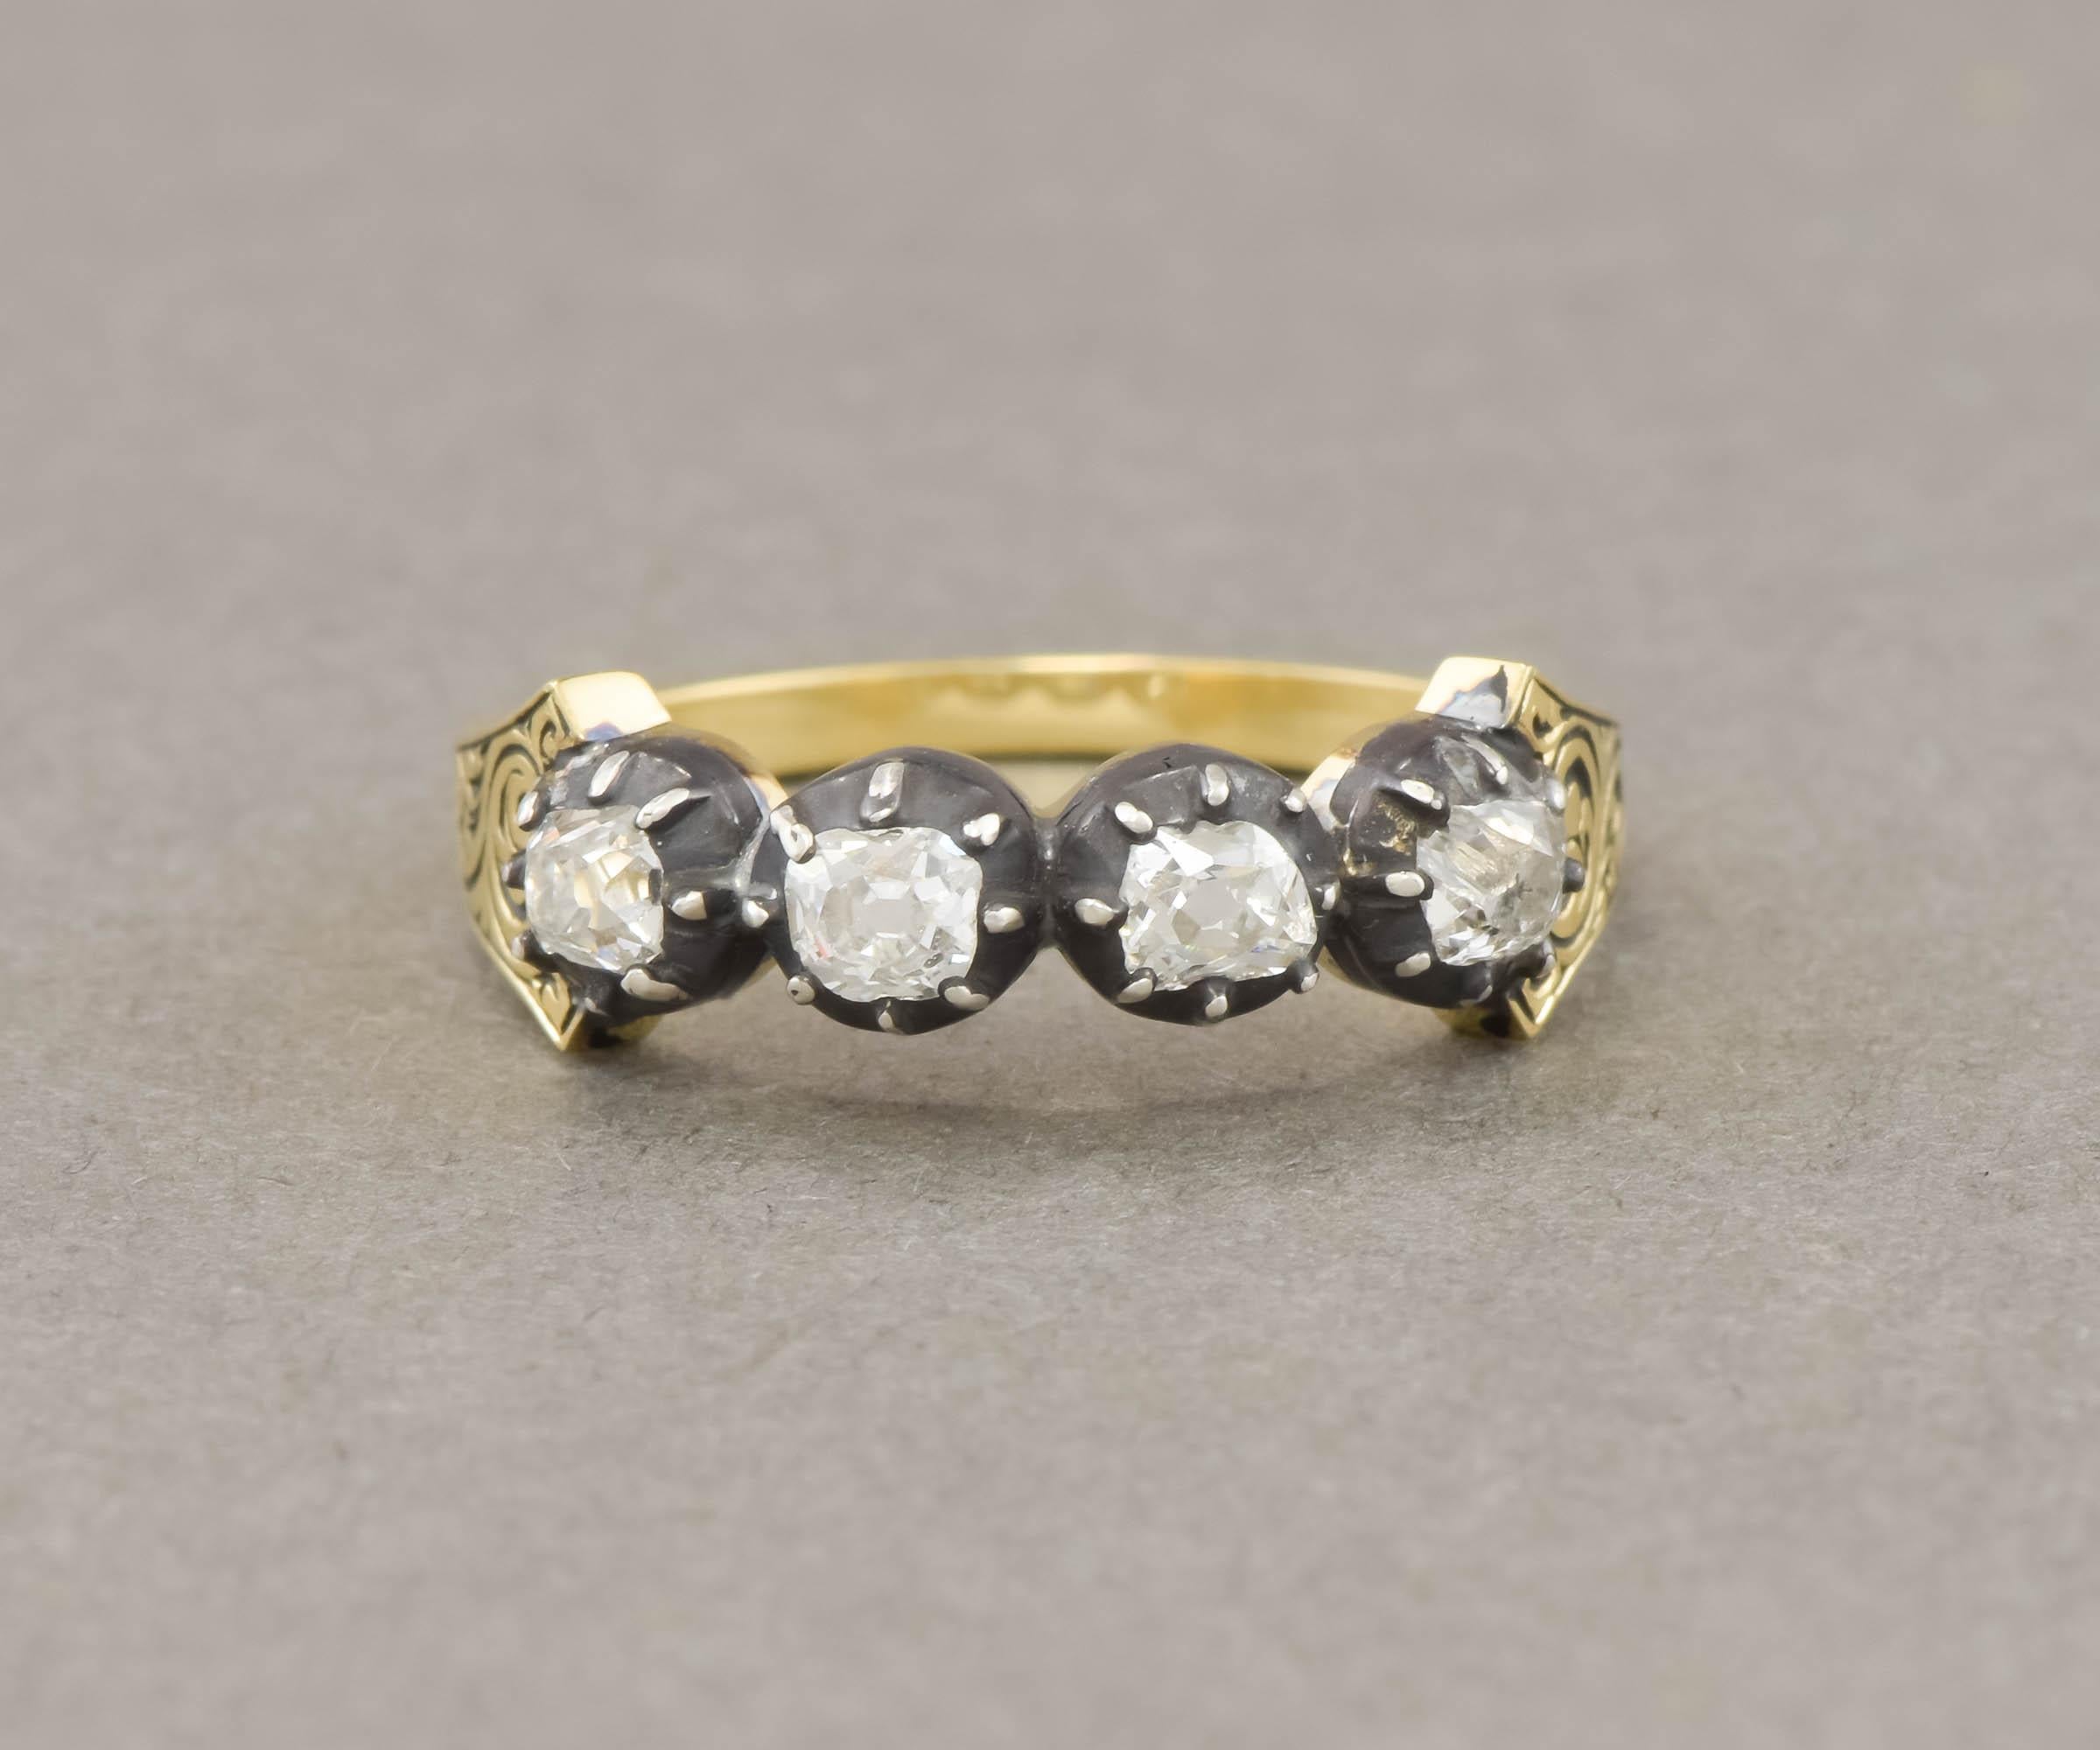 This is the second of two charming Georgian style diamond bands I've created using genuine Georgian period old mine cut diamonds from a damaged antique French brooch.  (a solitaire ring that looks amazing paired with this band is also available, and